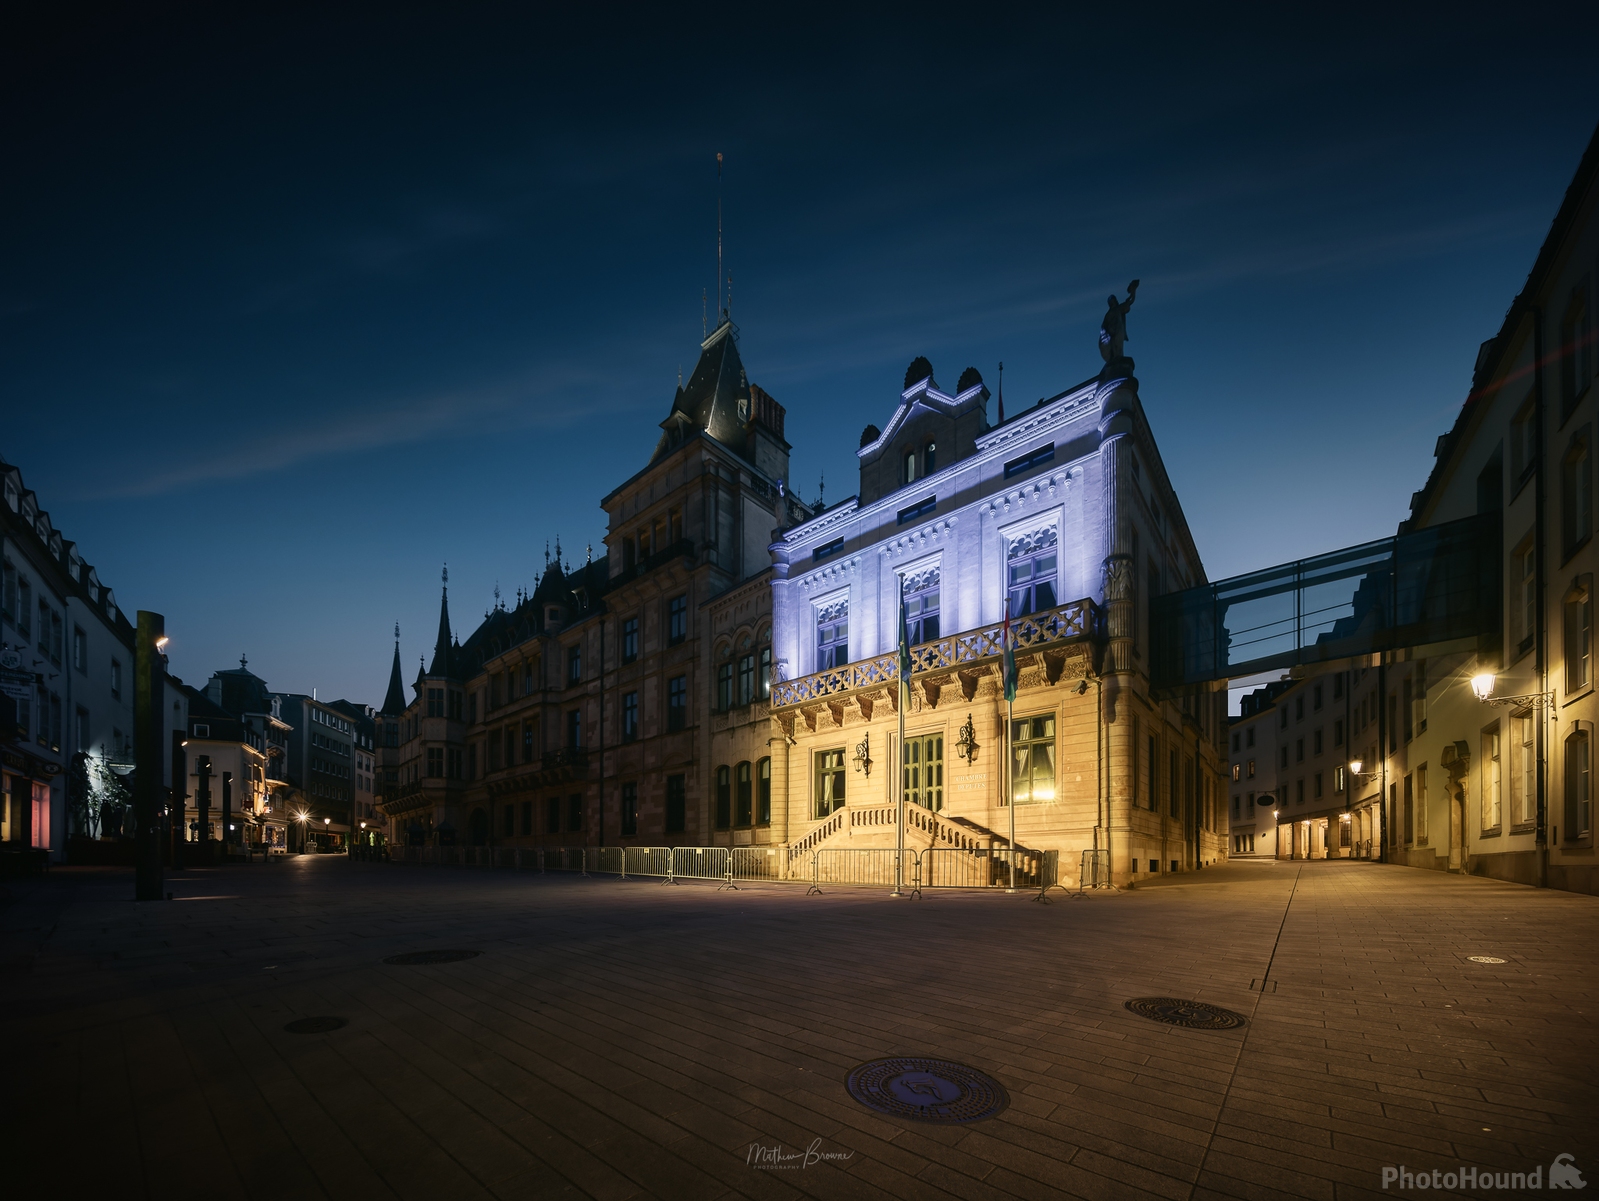 Image of Grand Ducal Palace by Mathew Browne